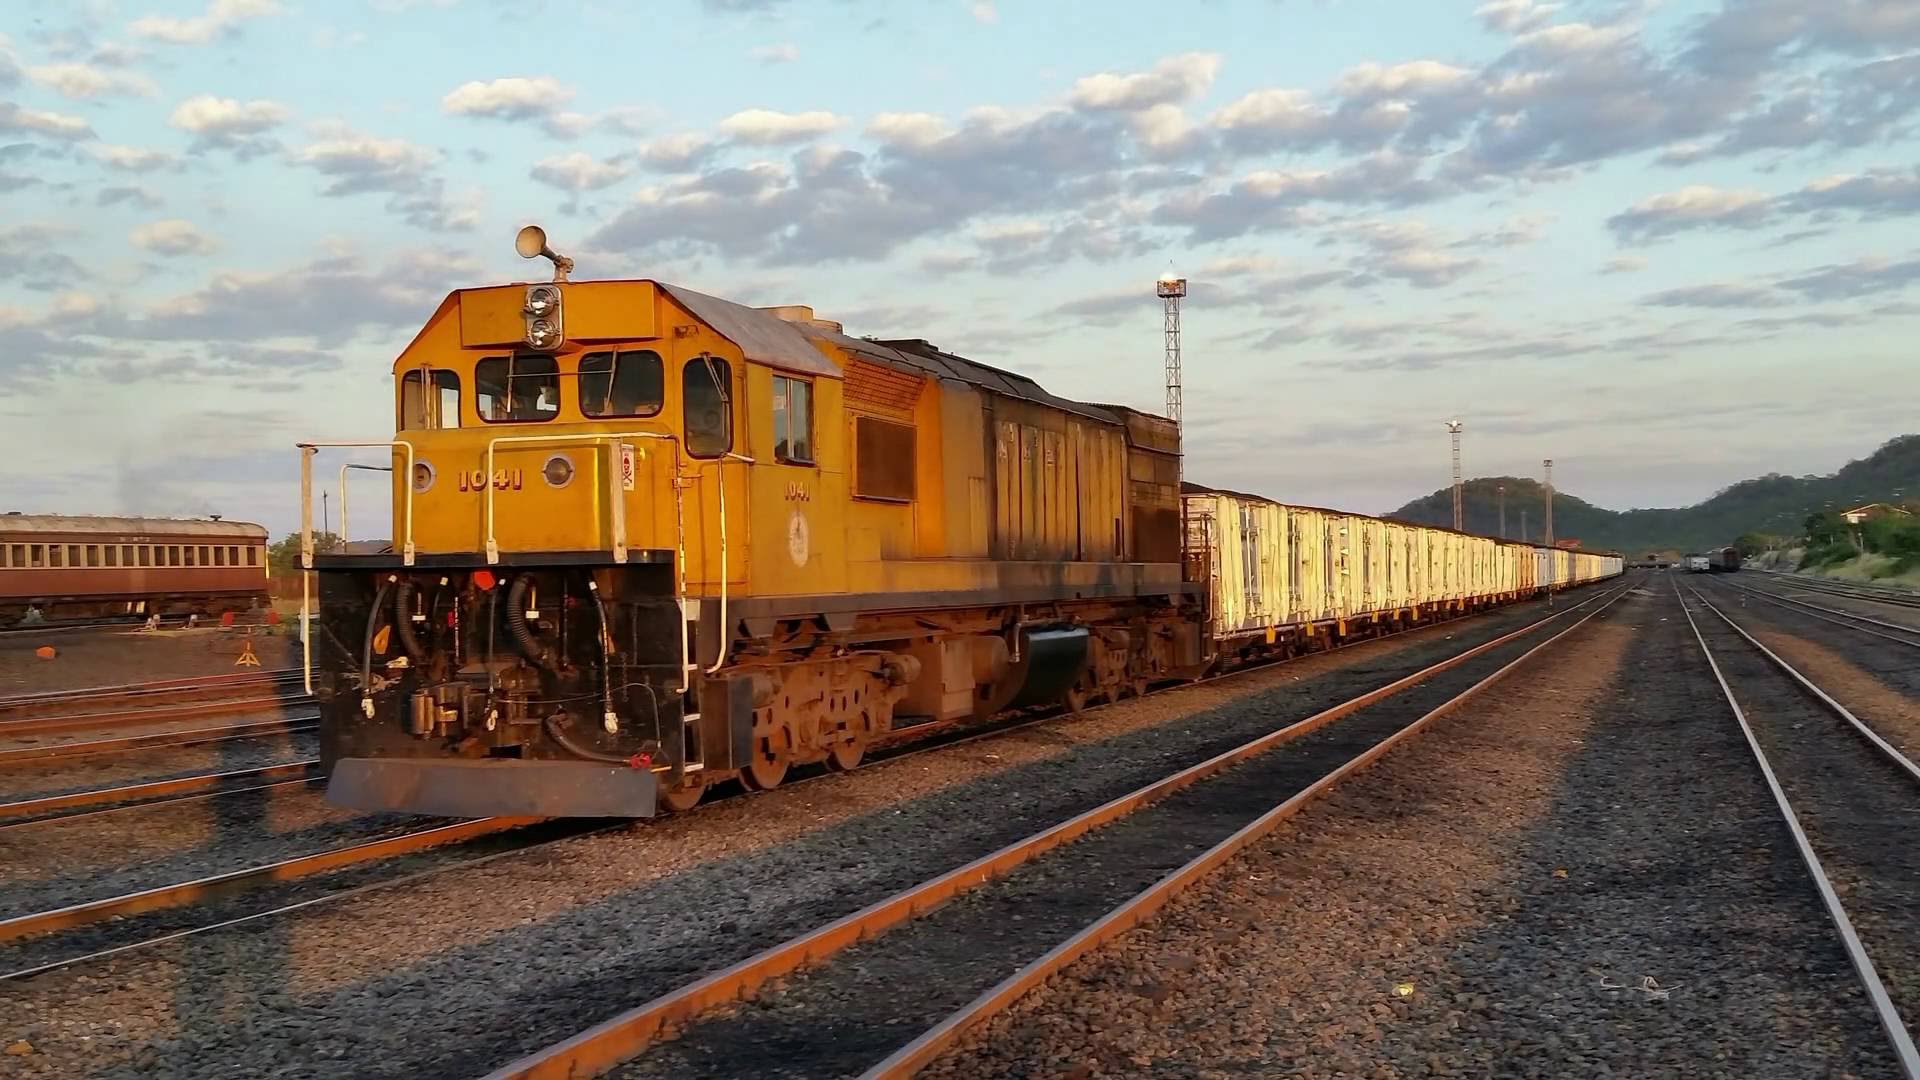 NRZ projects 32% revenue growth